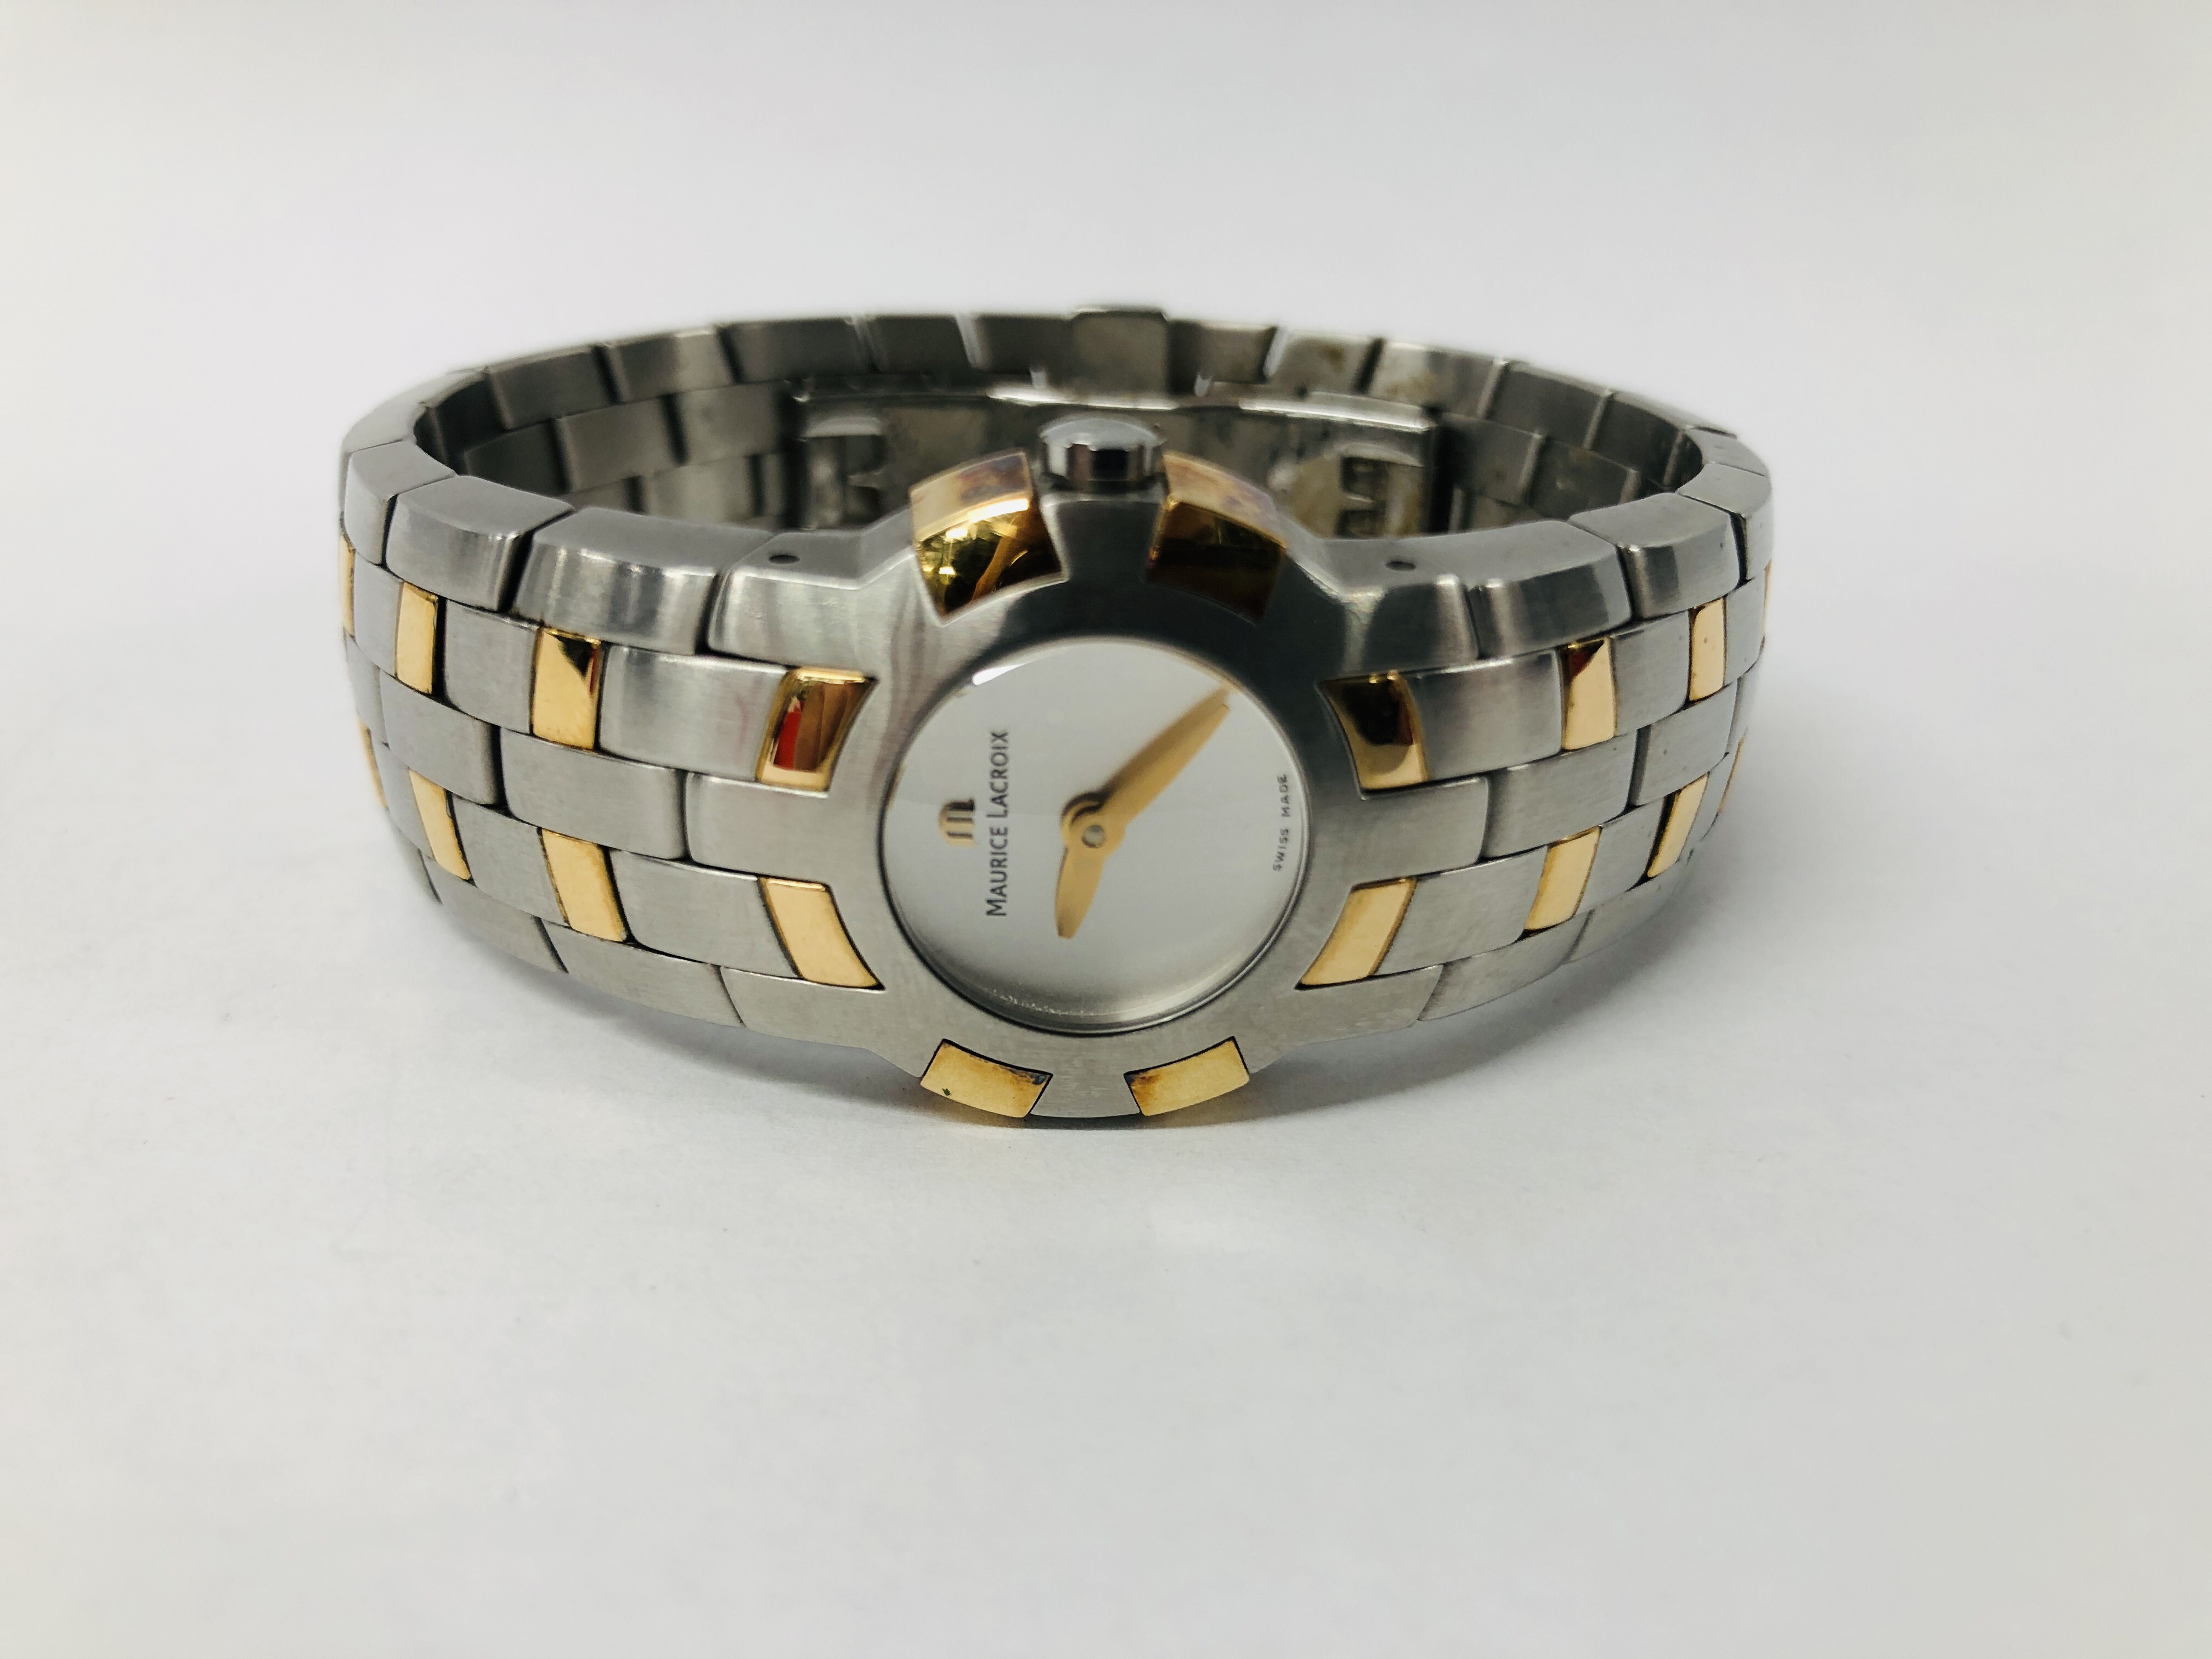 LADIES MAURICE LACROIX BRACELET WATCH THE CASE MARKED STAINLESS STEEL AND 18K 750 - Image 5 of 7